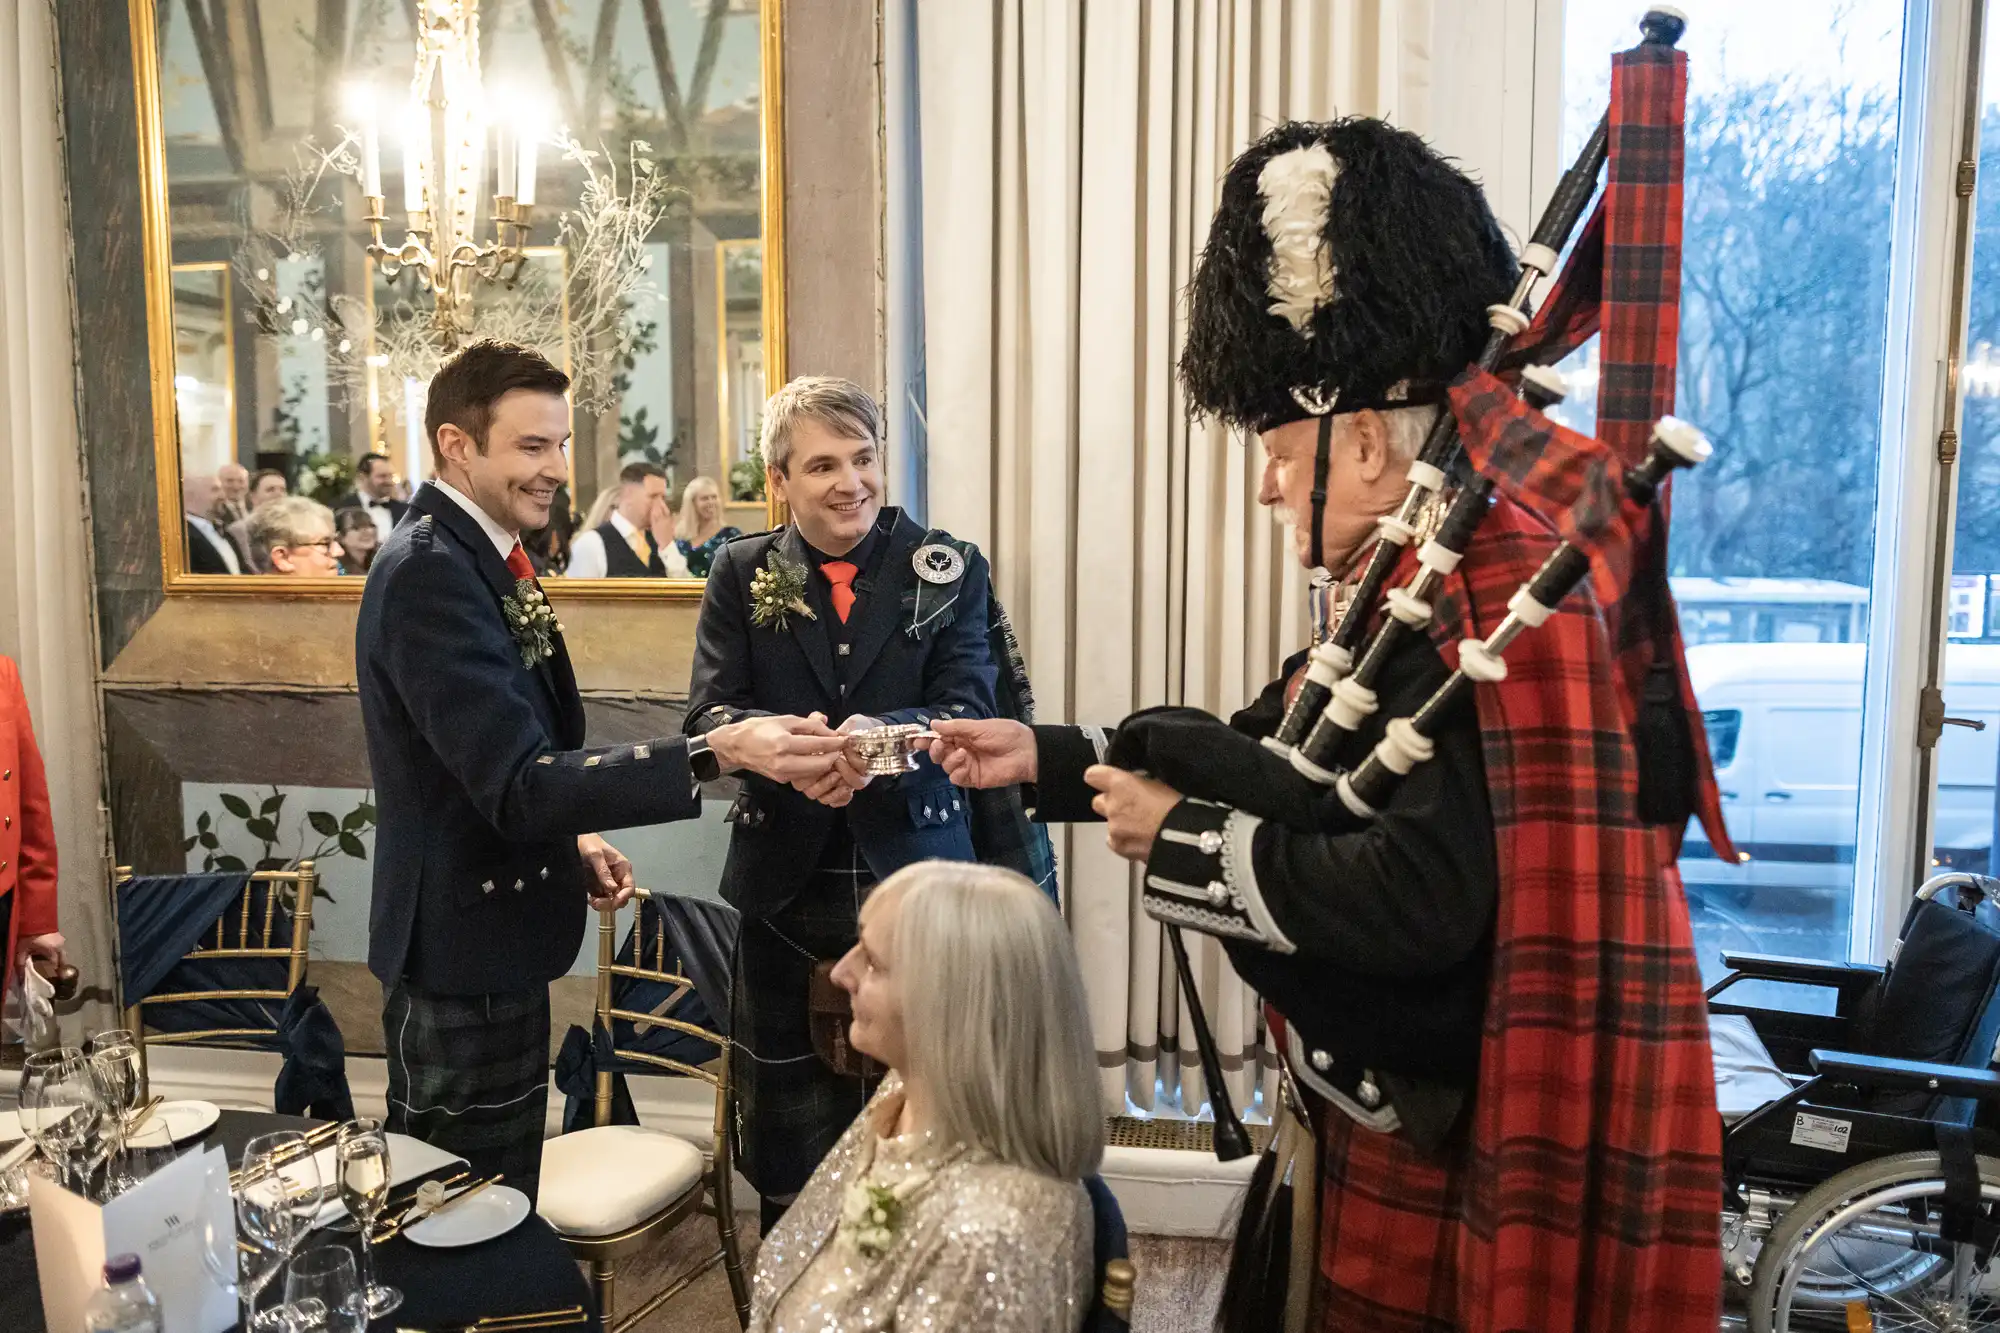 A man in traditional Scottish attire, including a kilt and feathered hat, plays bagpipes while two other men in kilts shake hands at a formal gathering. A woman with grey hair is seated nearby.